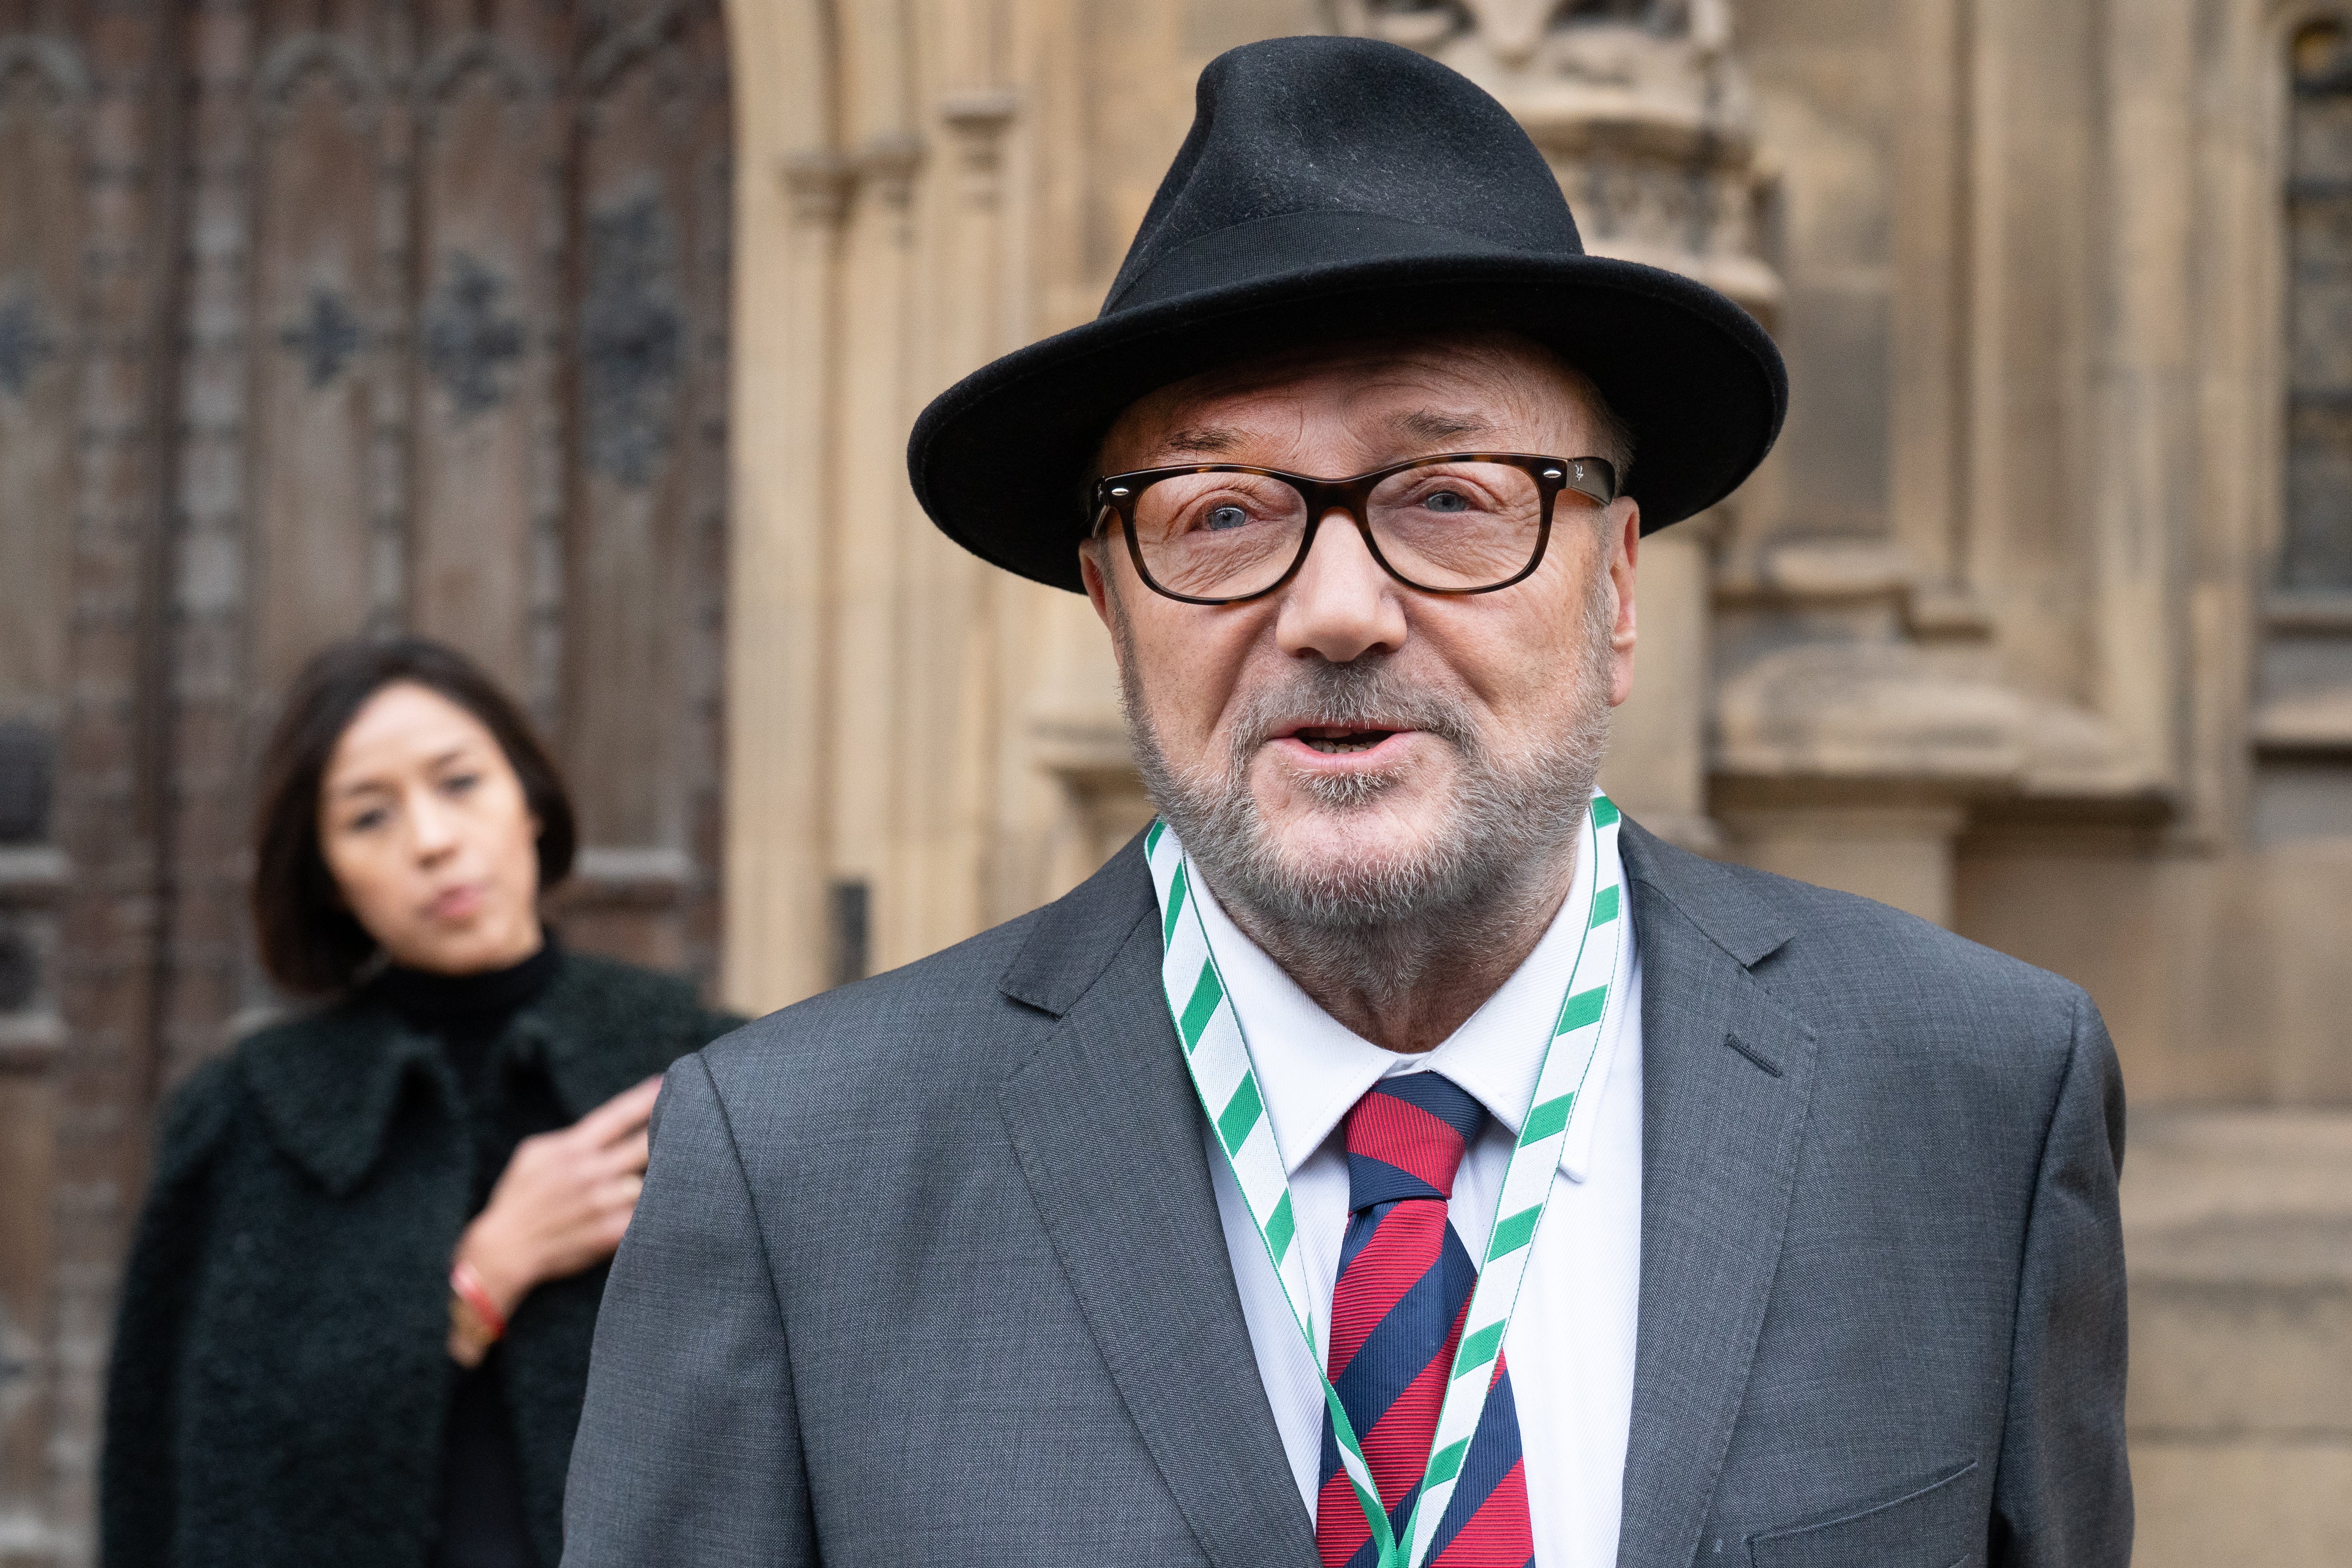 Eyes will be on the Rochdale local elections after George Galloway won the by-election, and pledged to support an alliance of councillors in removing the mainstream parties